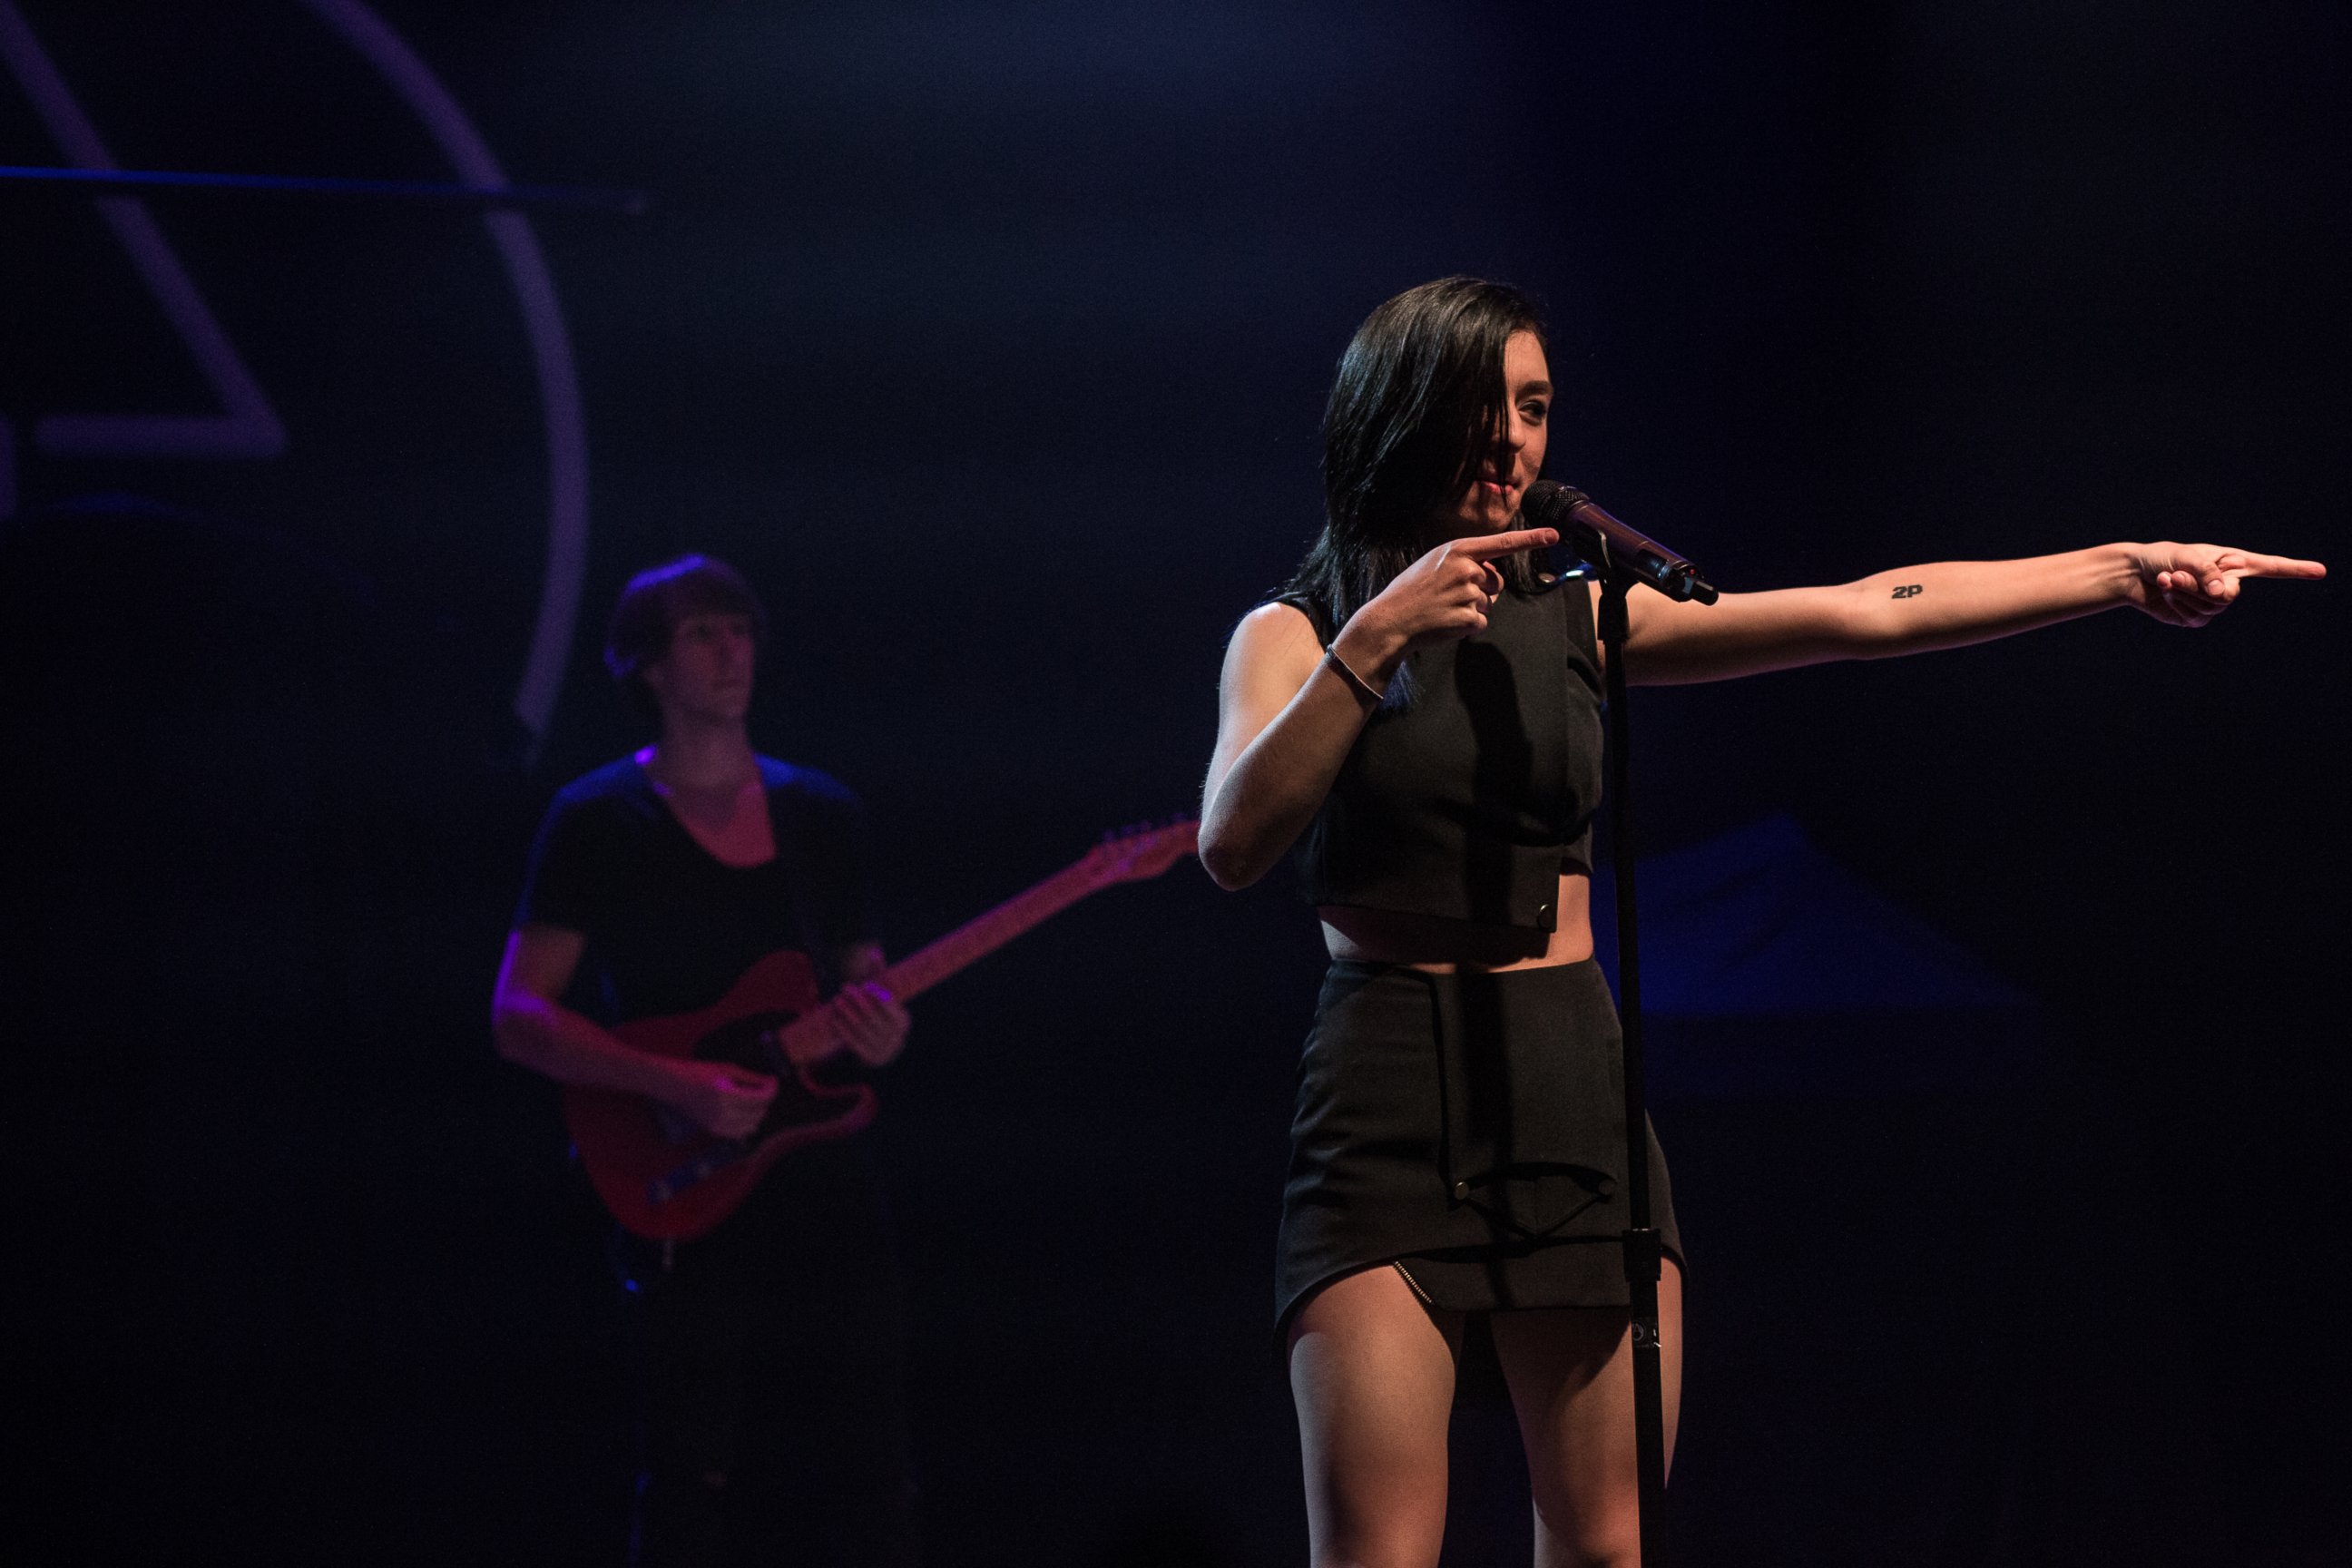 PHOTO: Singer Christina Grimmie performs at Plaza Live Theater in Orlando, Florida, on June 10, 2016. Following the concert, she was shot, and later died. She was 22.